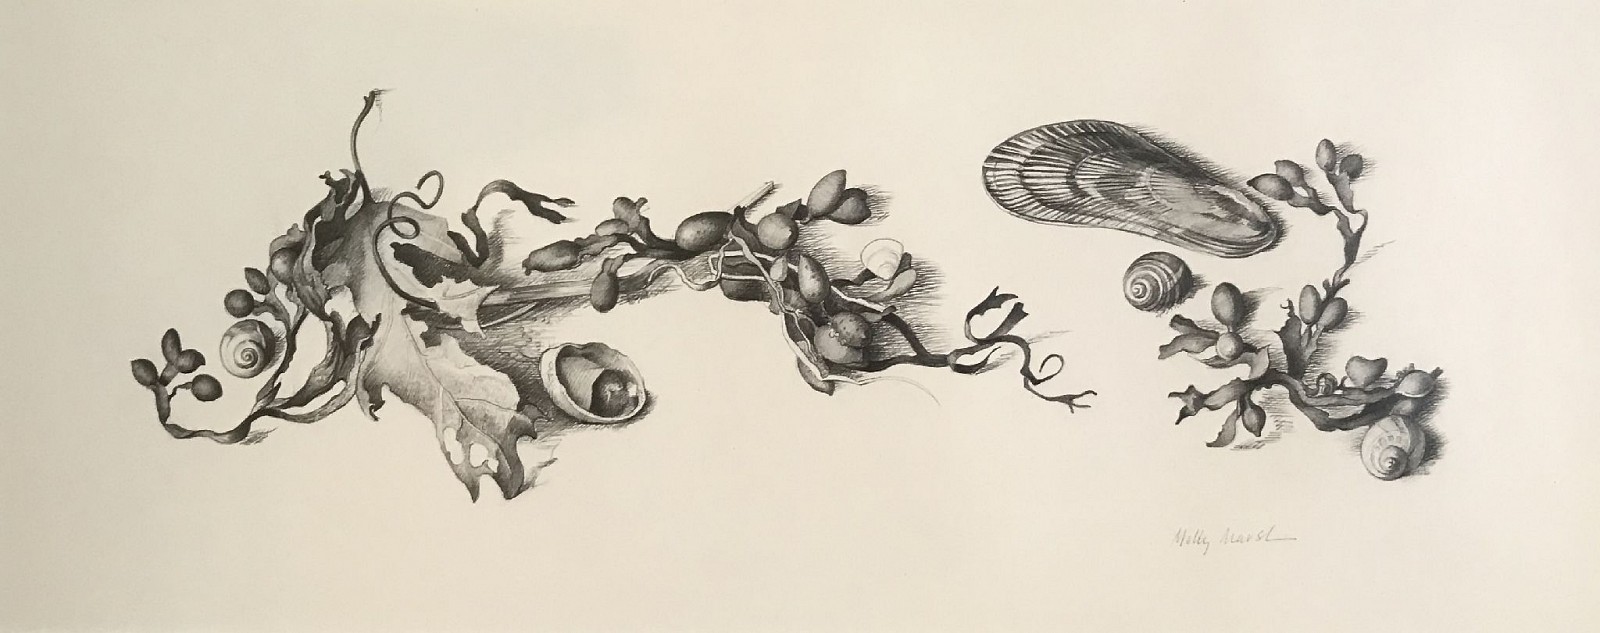 Molly Marsh, Oakleaves, Scallop and Other Shells
Sea Series #43
pencil on paper, 6 1/4" x 15 1/2" ss
signed, Molly Marsh, lower left
JCA 5729
$650